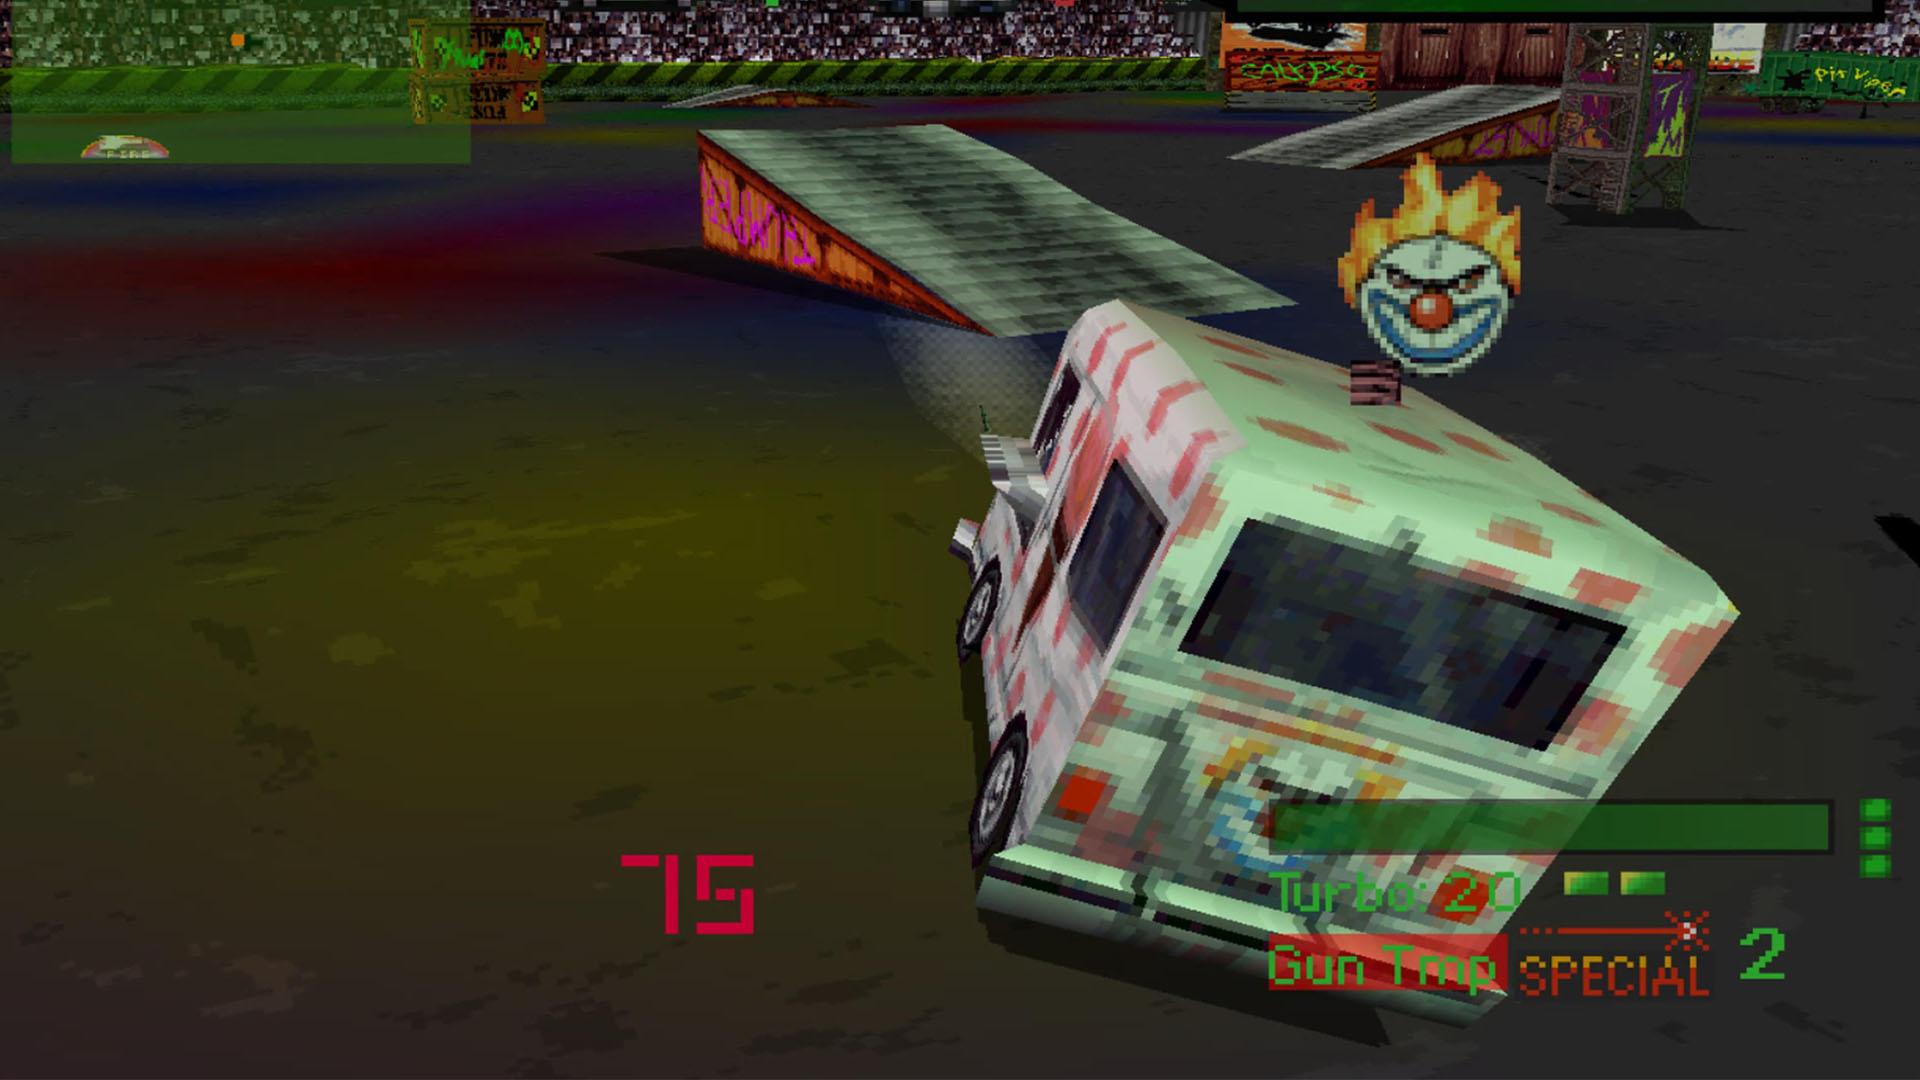 Twisted Metal PS4 – The Return of Sweet Tooth and The Demolition